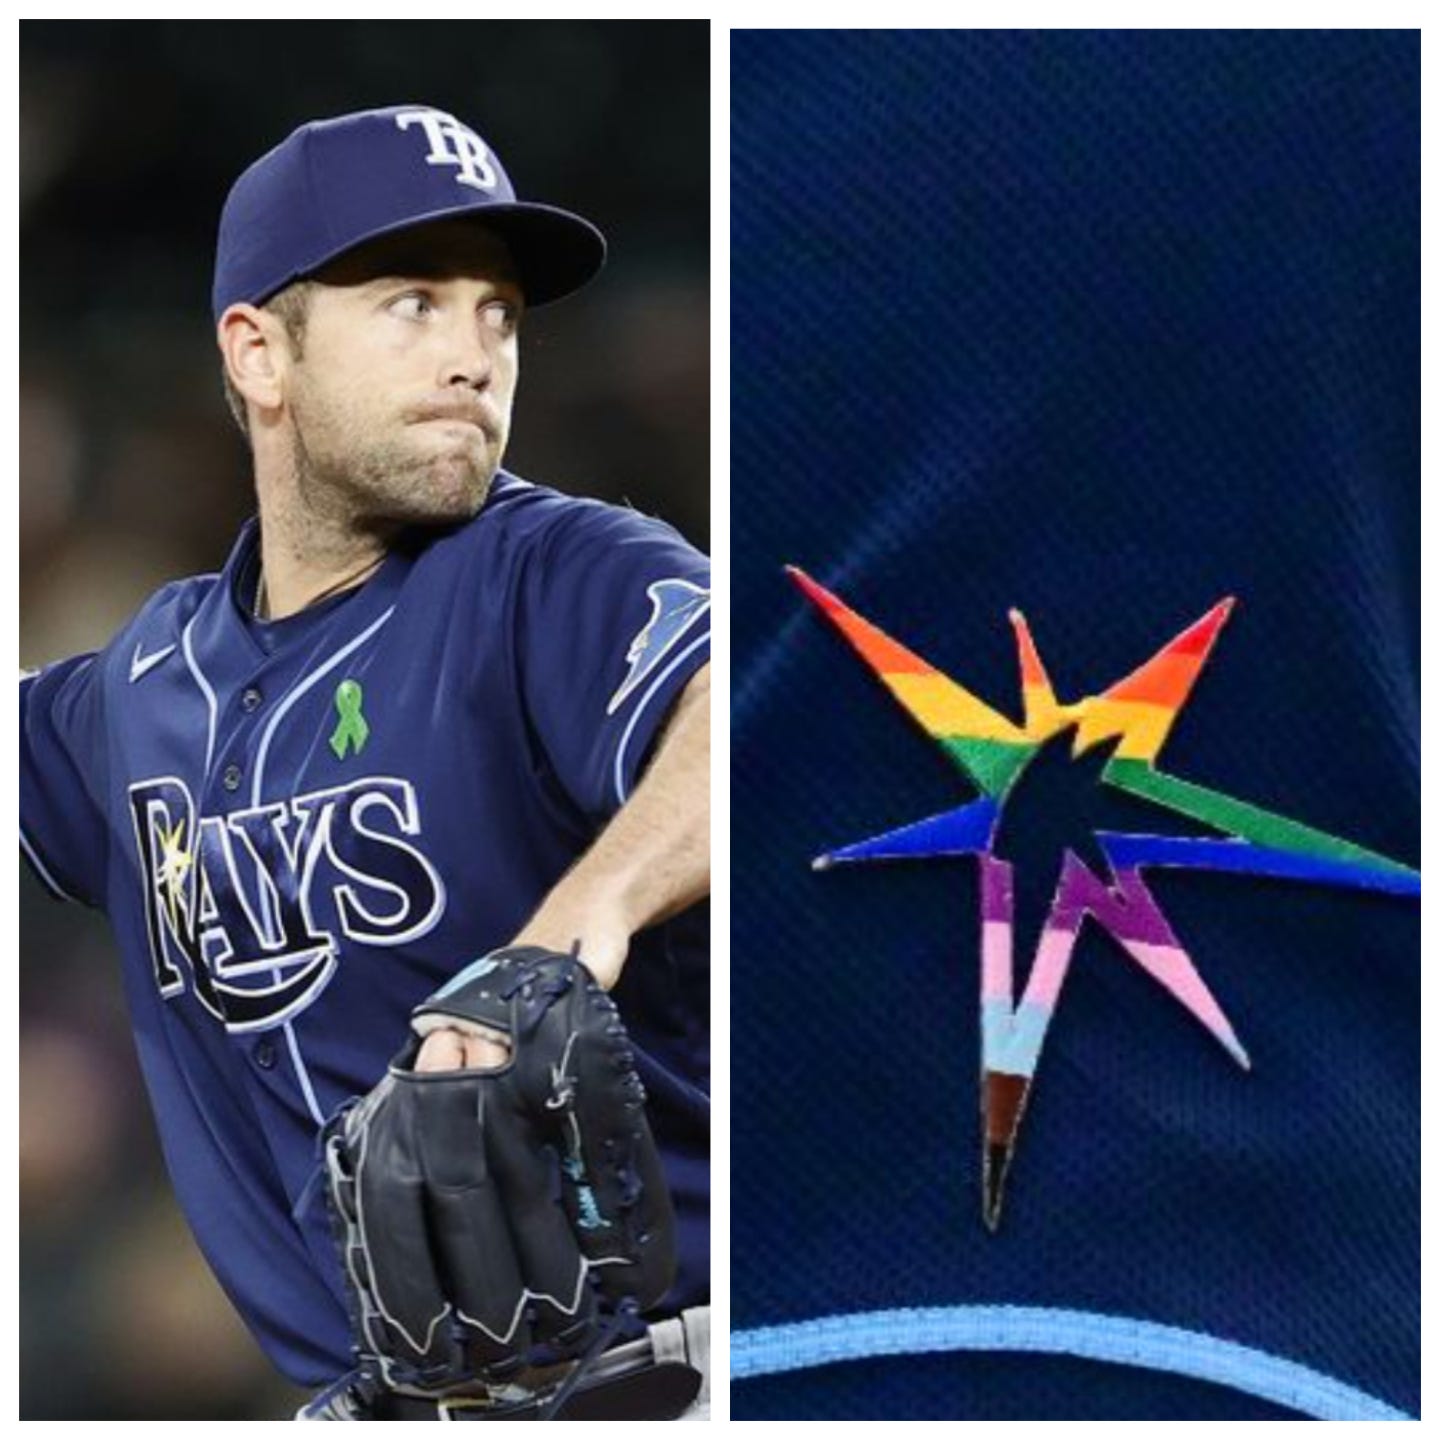 No To LGBTQ Uniforms: Tampa Bay Rays Players Trash Pride Colors, Say Jesus  Never Allowed Such Lifestyle